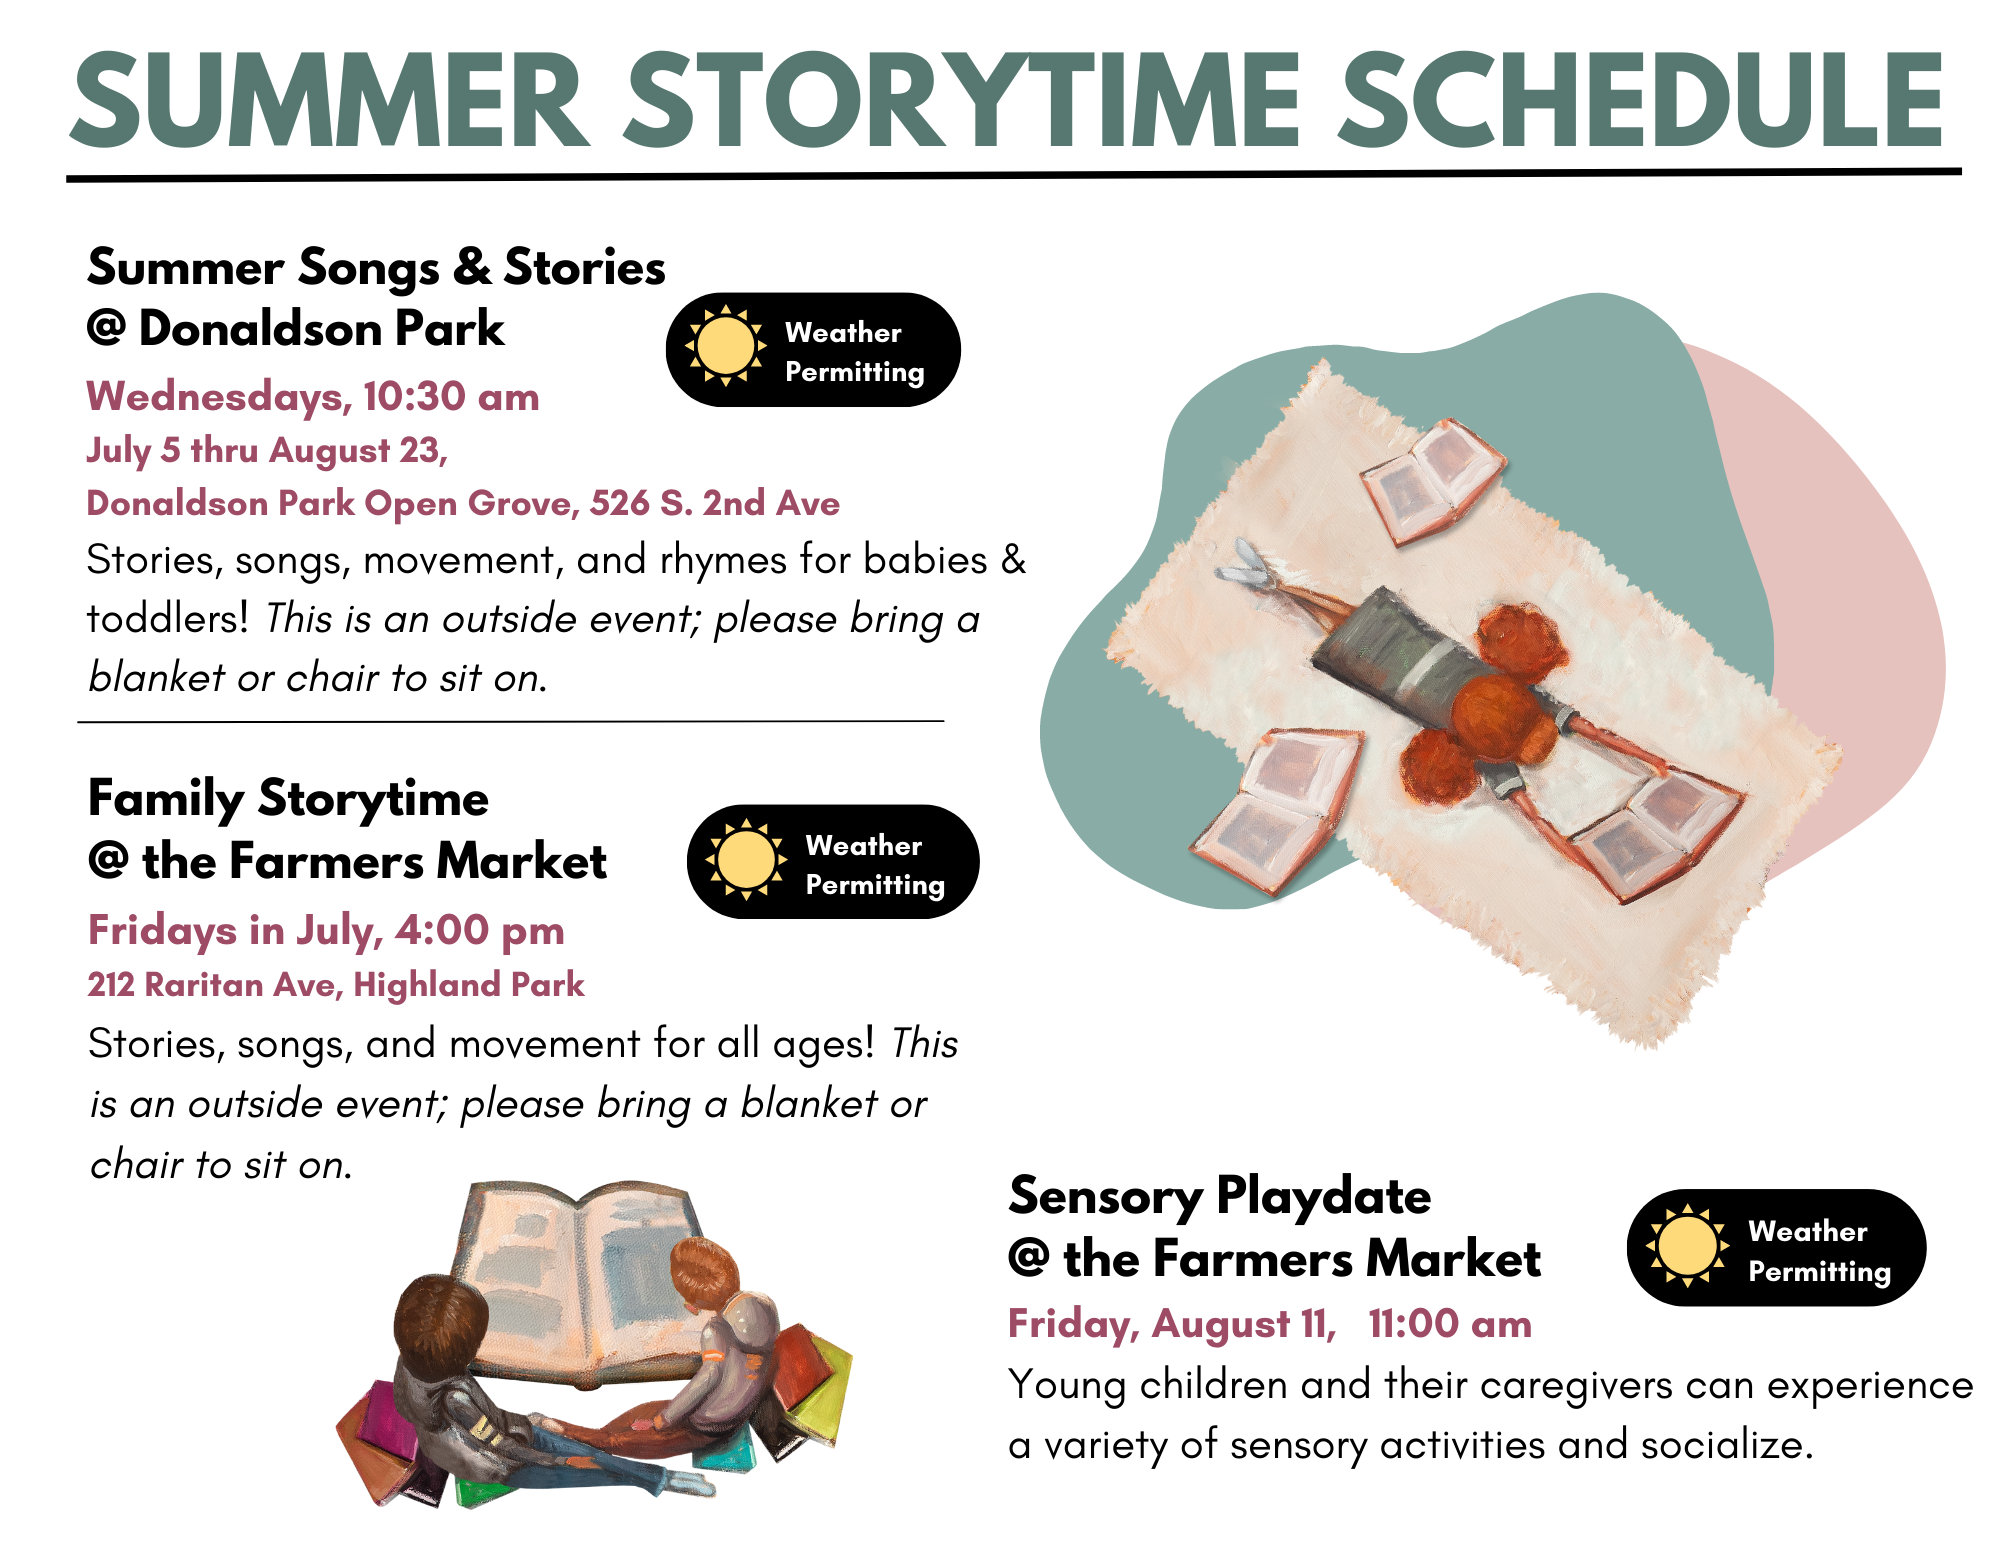 Summer Storytime Schedule: All storytimes are weather permitting Summer Songs & Stories @ Donaldson Park Wednesdays, 10:30 am July 5 thru August 23, Donaldson Park Open Grove, 526 S. 2nd Ave Stories, songs, movement, and rhymes for babies & toddlers! This is an outside event; please bring a blanket or chair to sit on. Family Storytime @ the Farmers Market Fridays in July, 4:00 pm 212 Raritan Ave, Highland Park Stories, songs, and movement for all ages! This is an outside event; please bring a blanket or chair to sit on. Sensory Playdate @ the Farmers Market Friday, August 11, 11:00 am Young children and their caregivers can experience a variety of sensory activities and socialize.